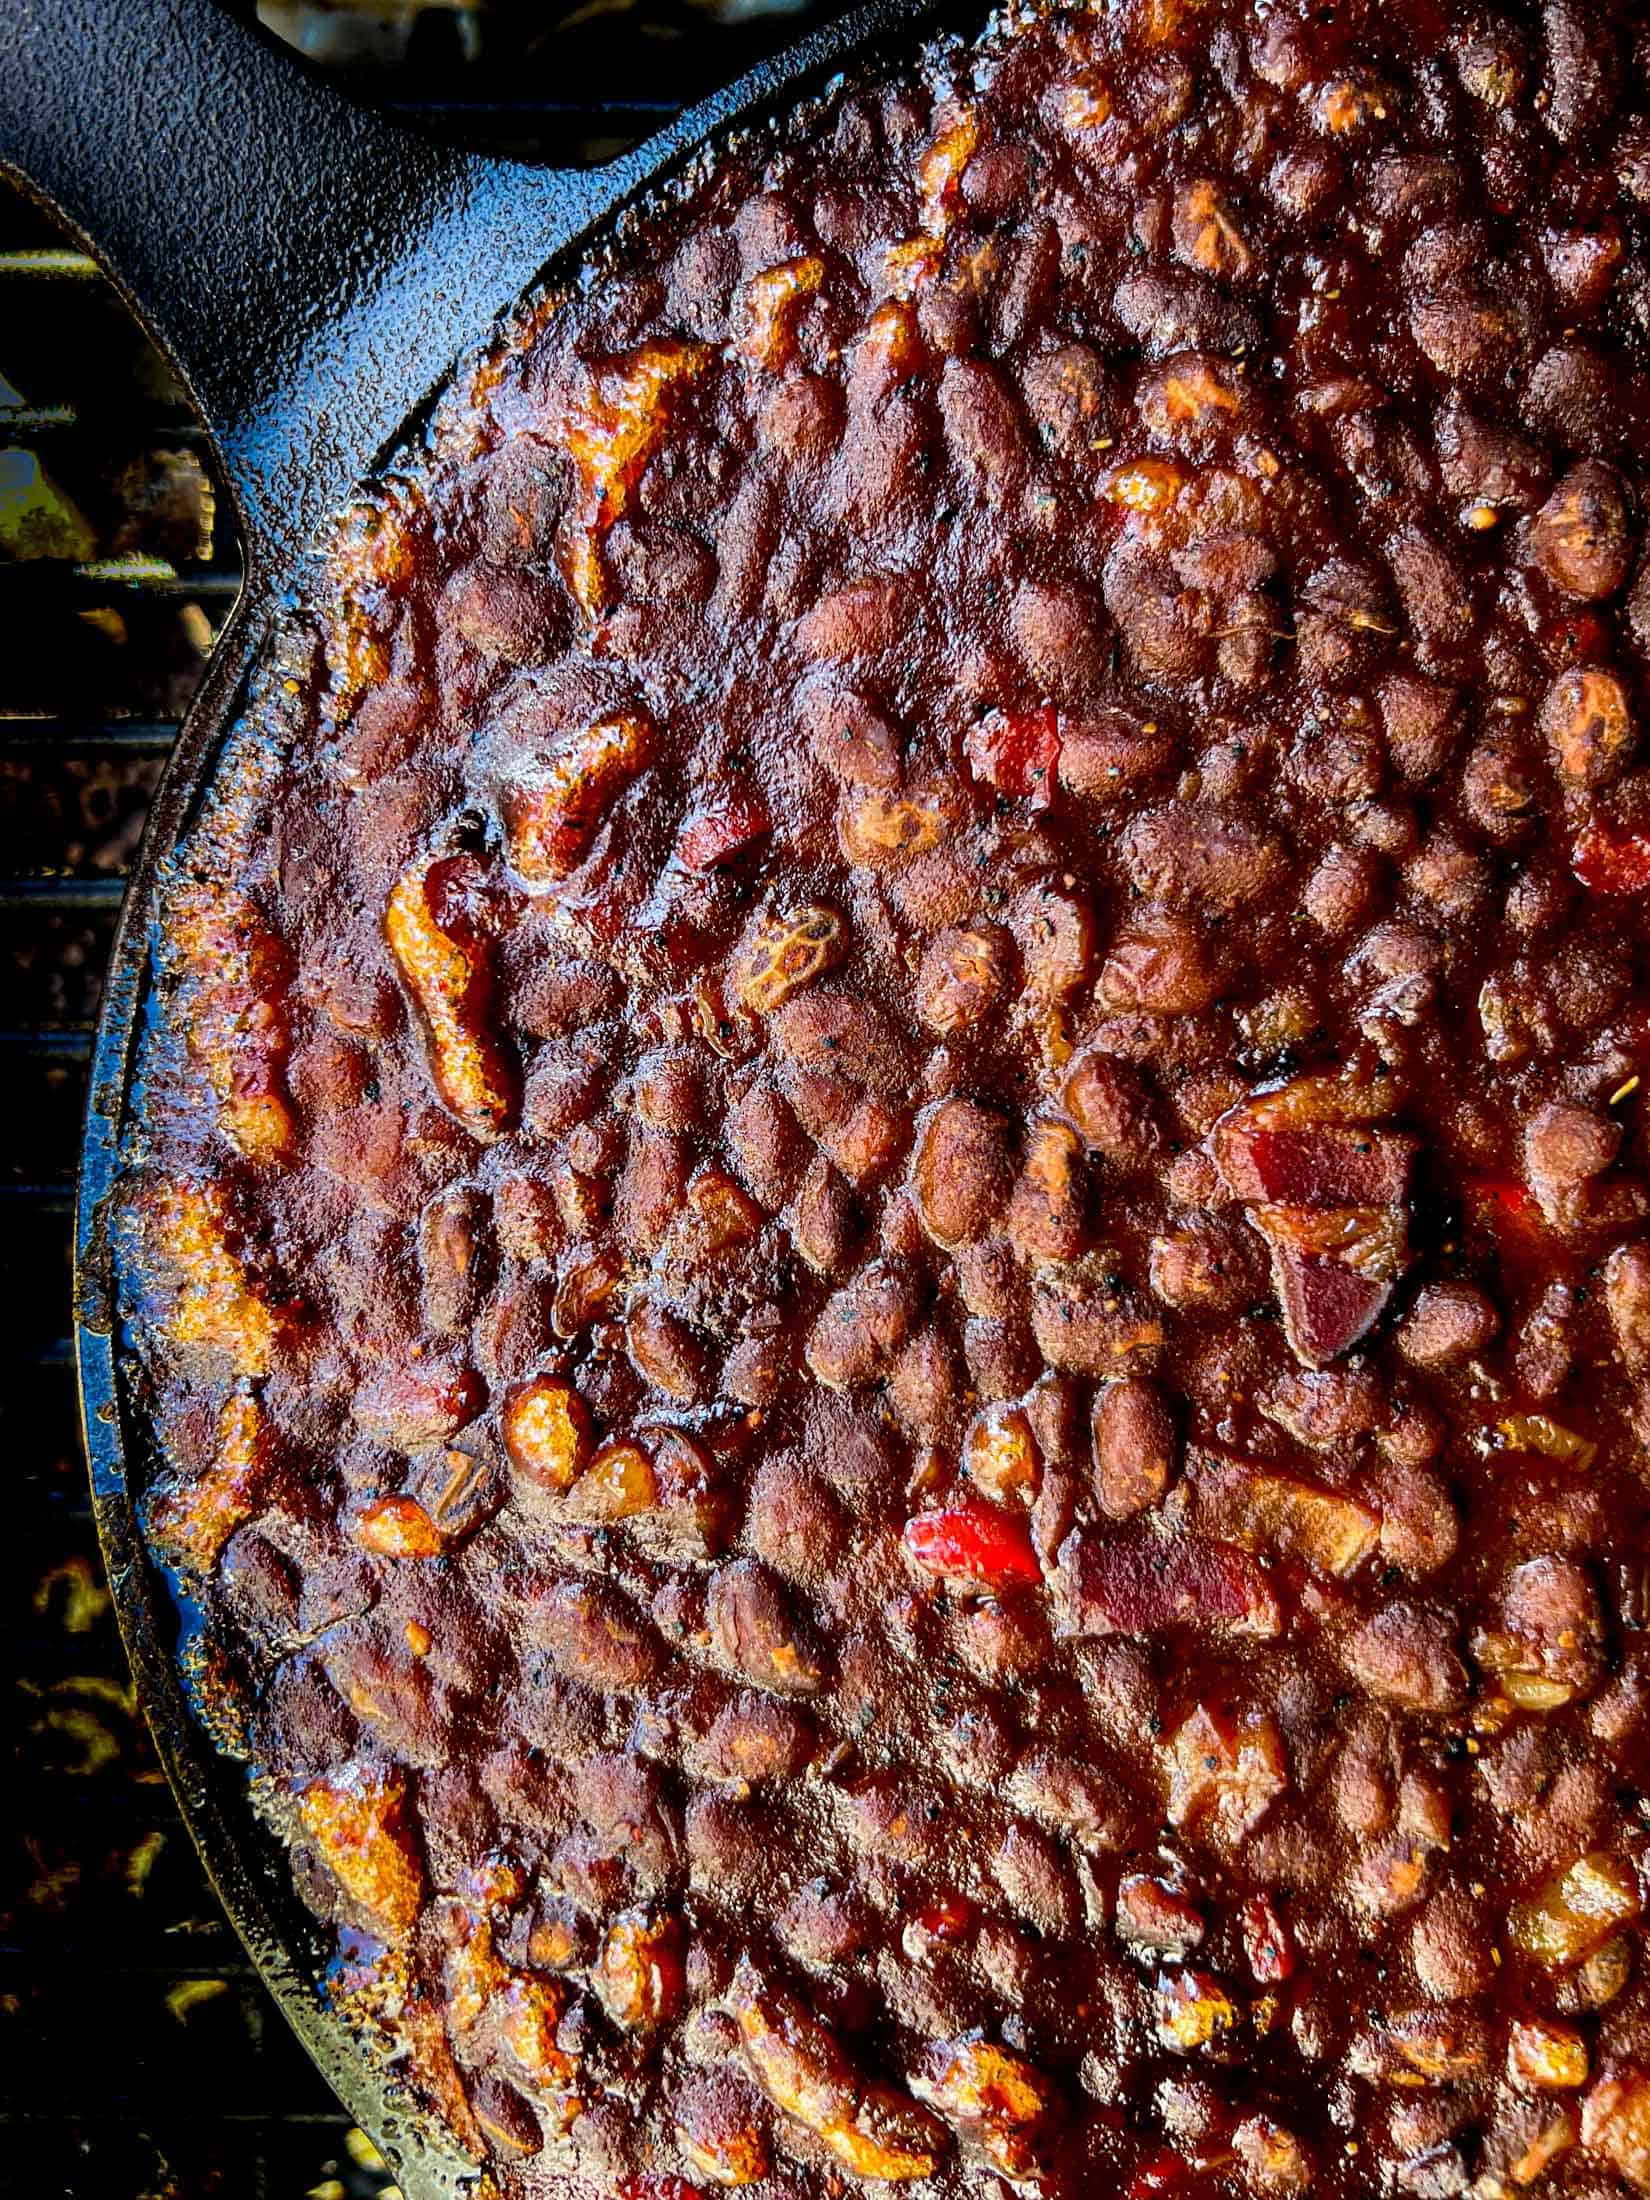 Close up image of pellet grill baked beans.